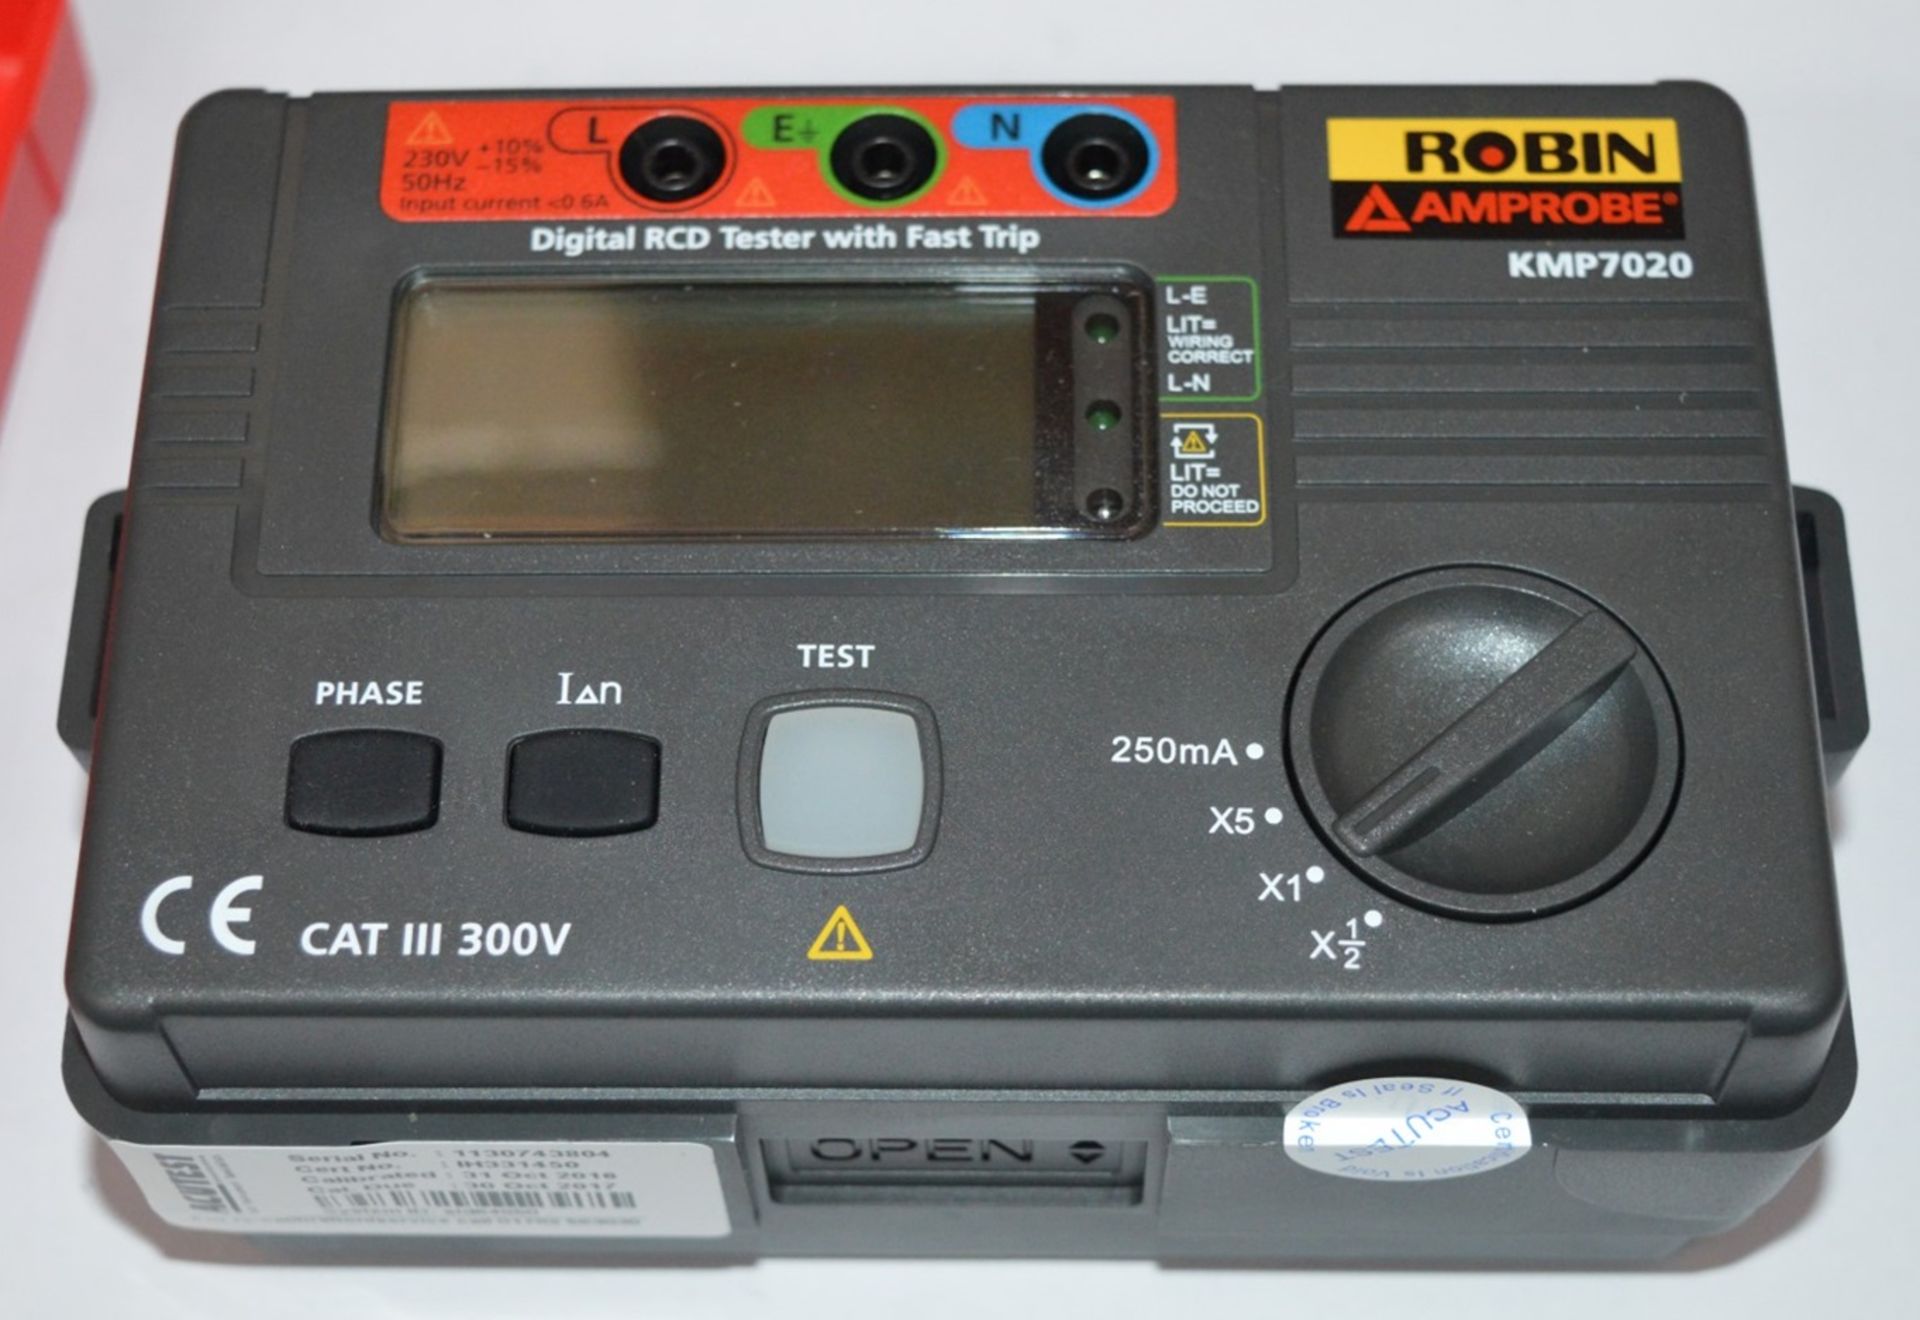 1 x Robin Amprobe Digital RCD Tester Wth Fast Trip - Model KMP7020 - Boxed With All Accessories - - Image 9 of 12